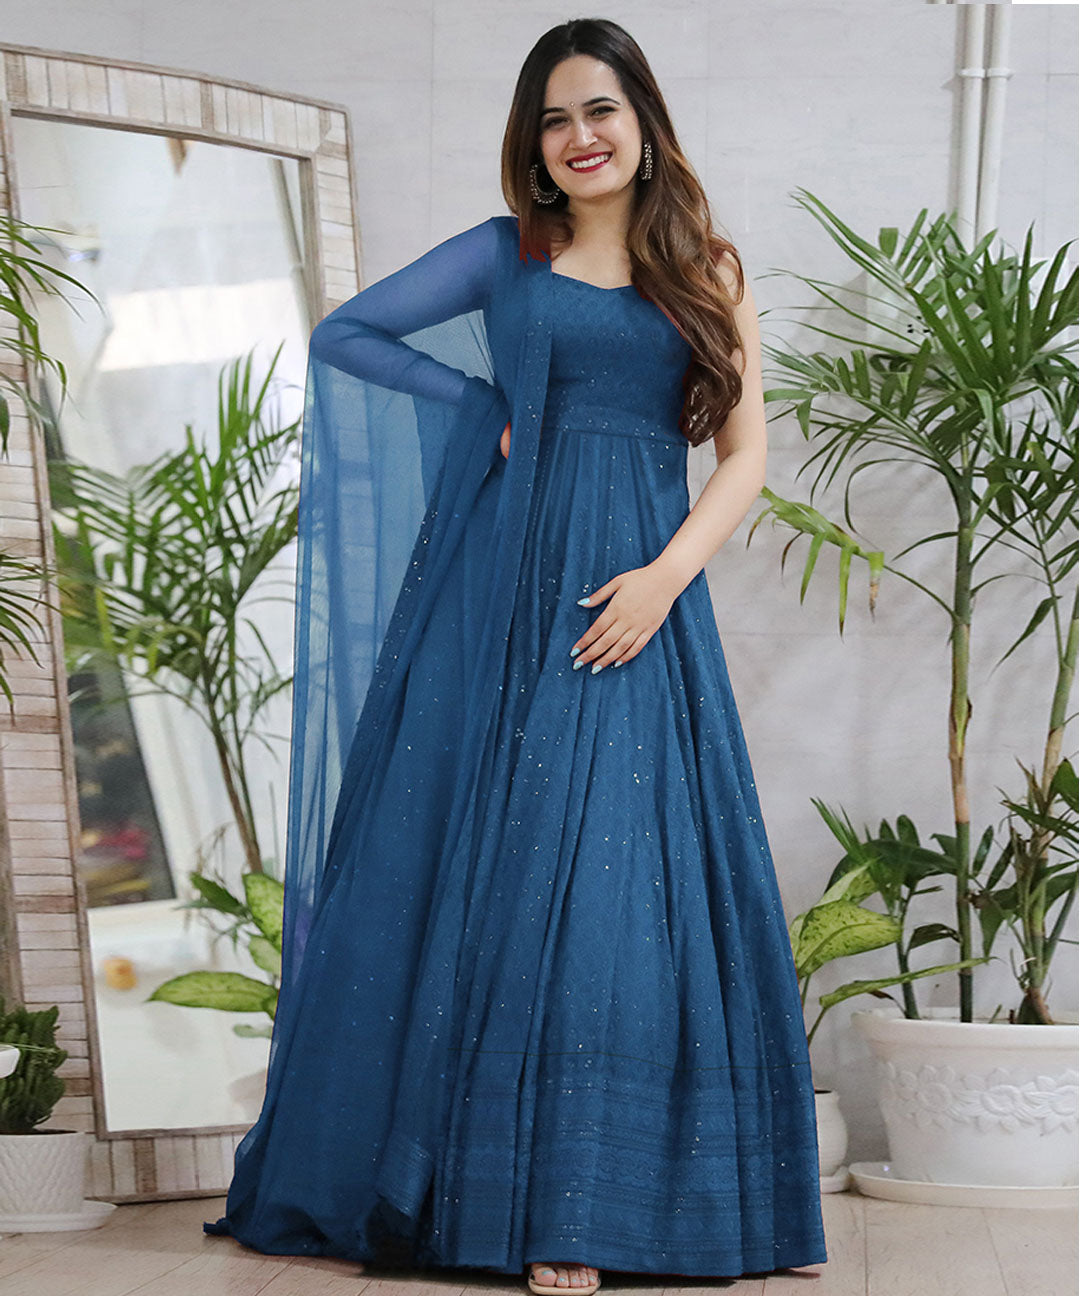 Turquoise Blue Anarkali Gown with matching Dupatta, featuring a flowing silhouette and elegant design.